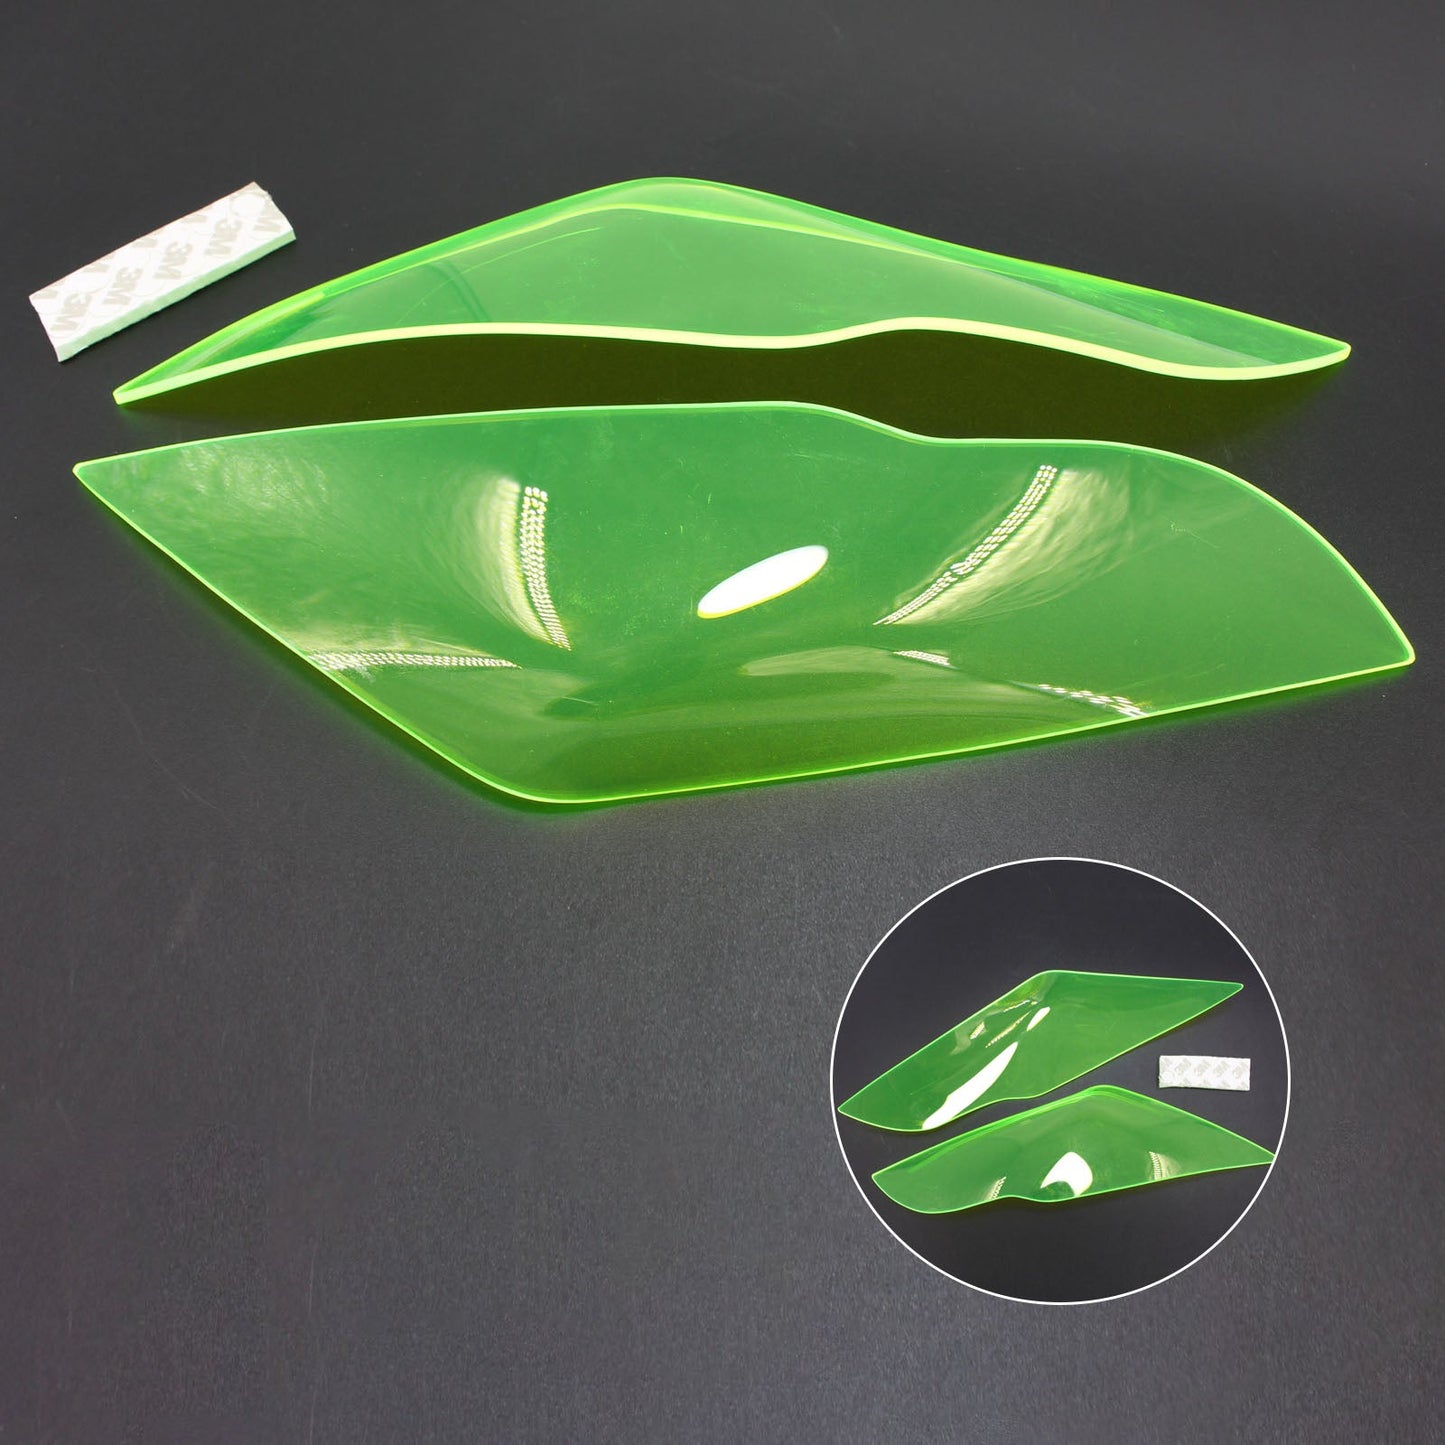 Front Headlight Lens Protection Cover Clear Fit For Kawasaki Zx-10R Zx 10R 11-15